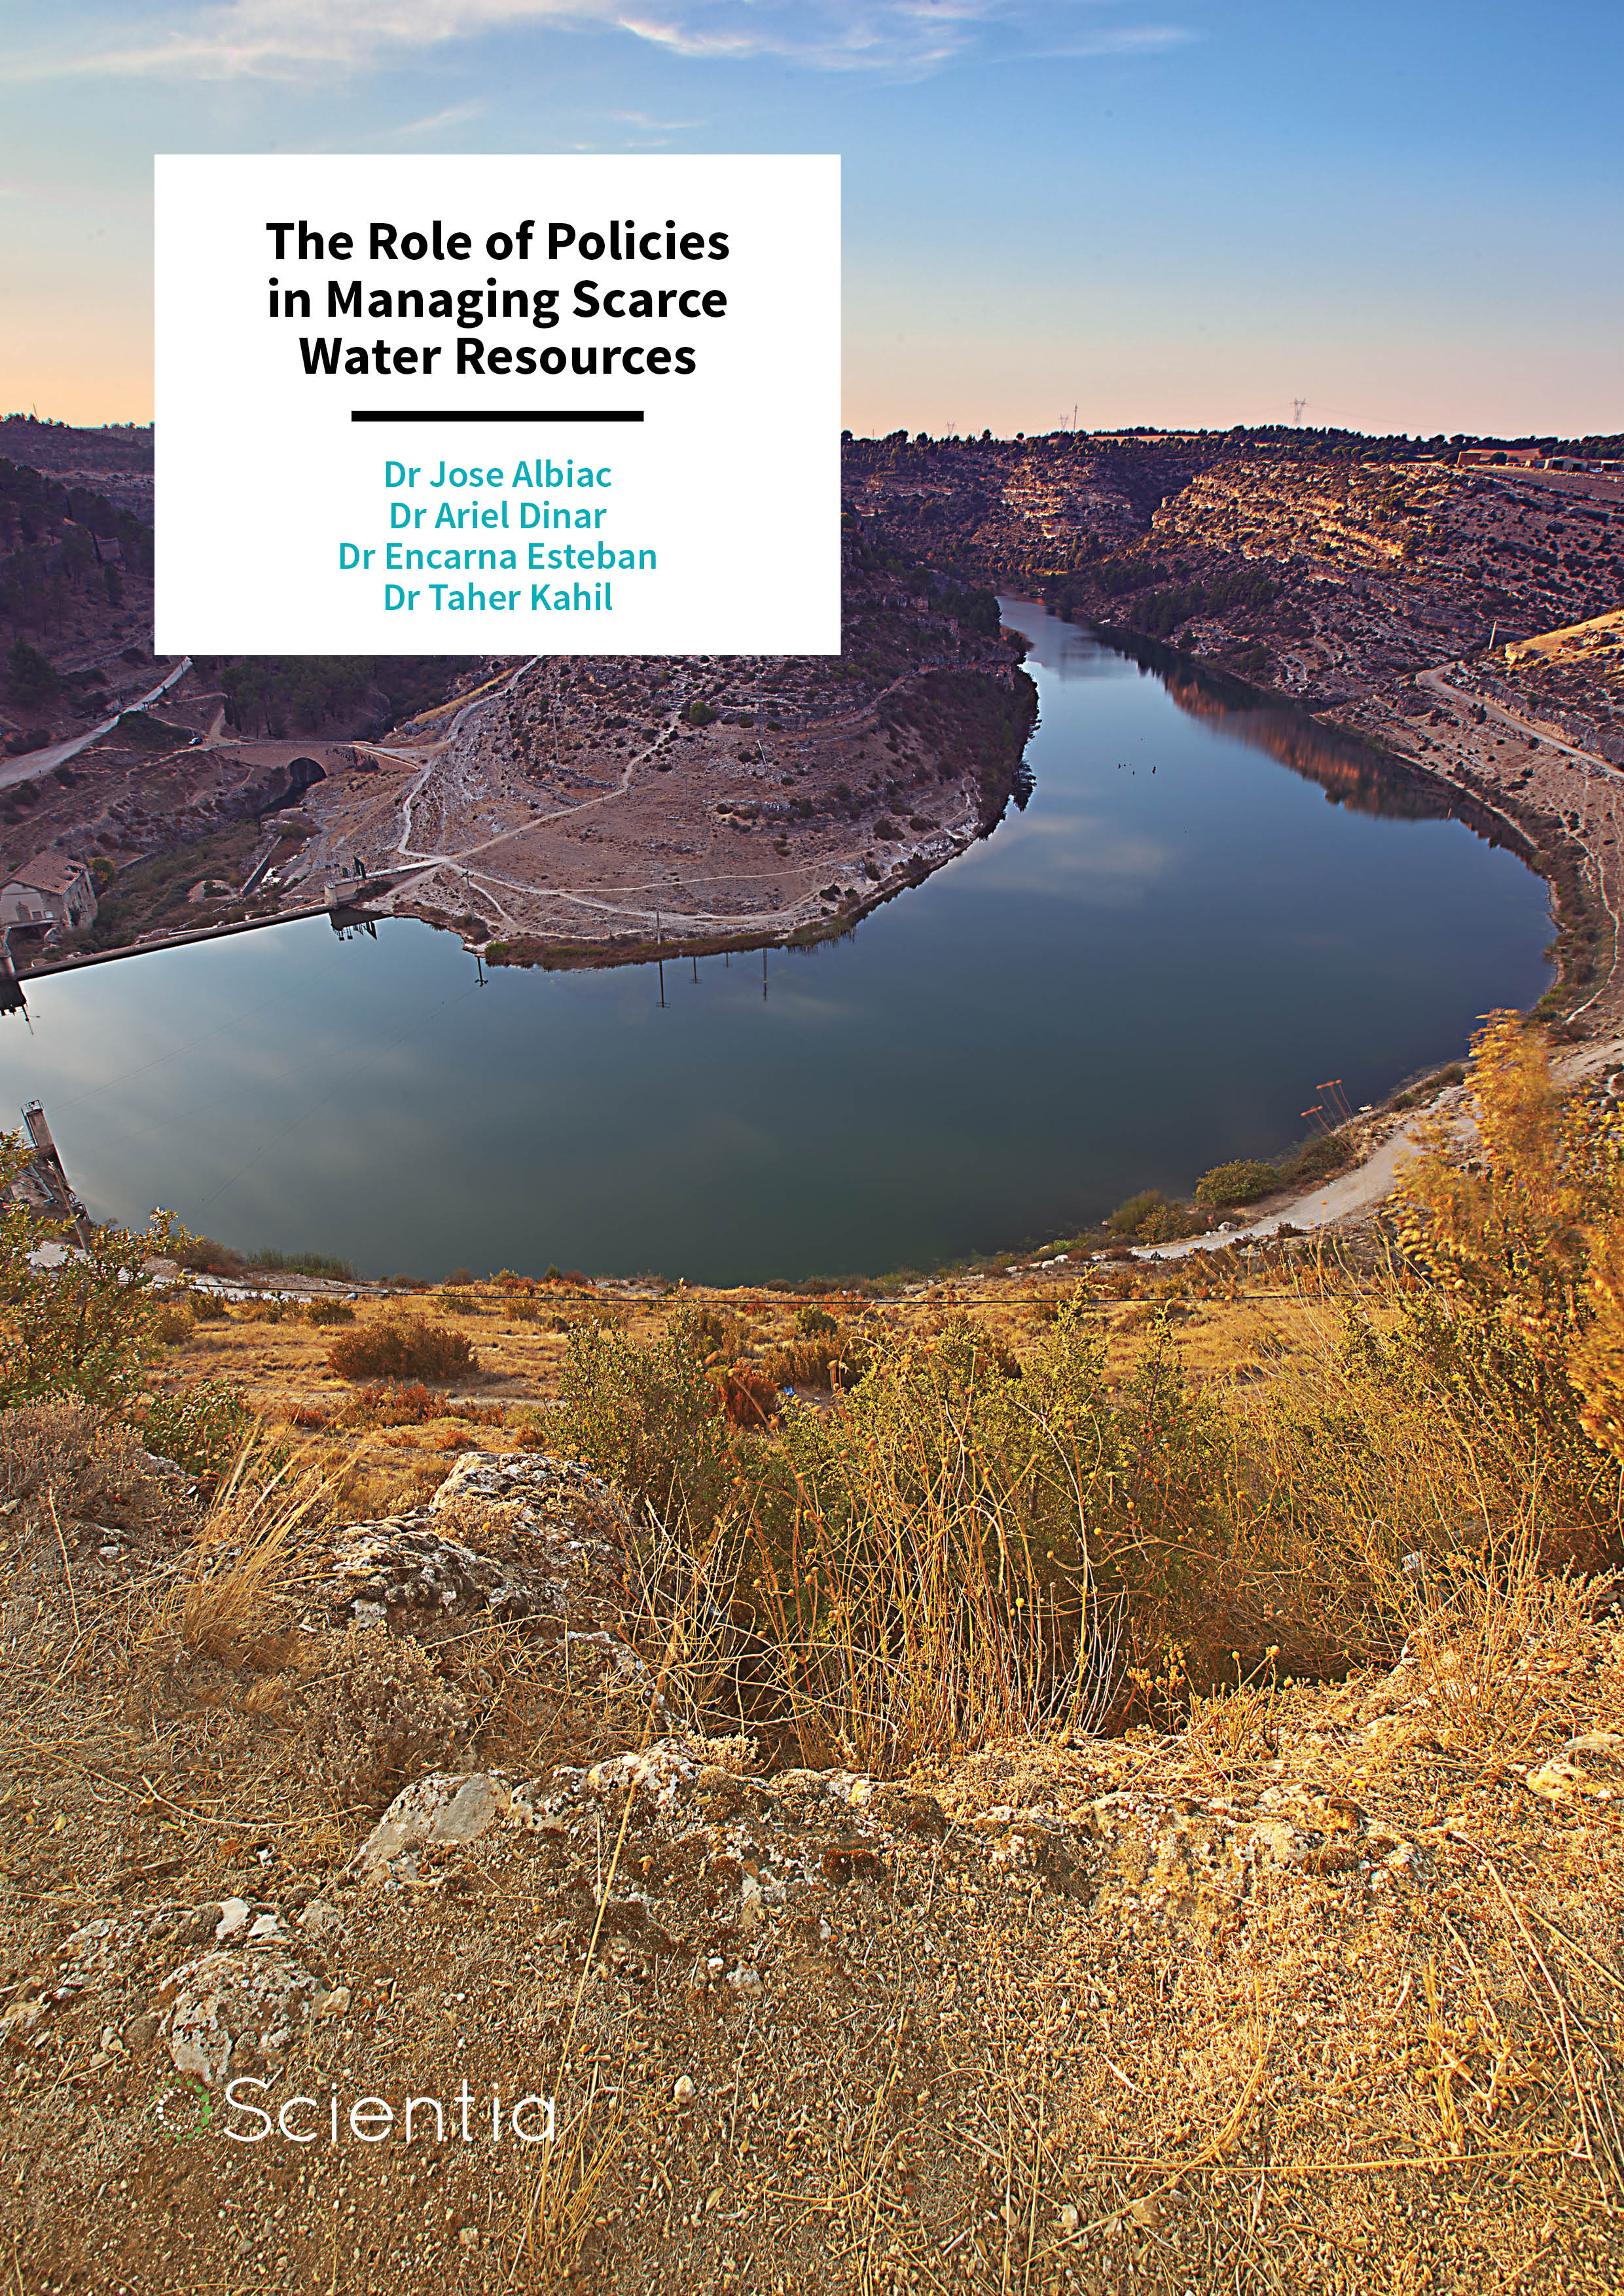 The Role of Policies in Managing Scarce Water Resources